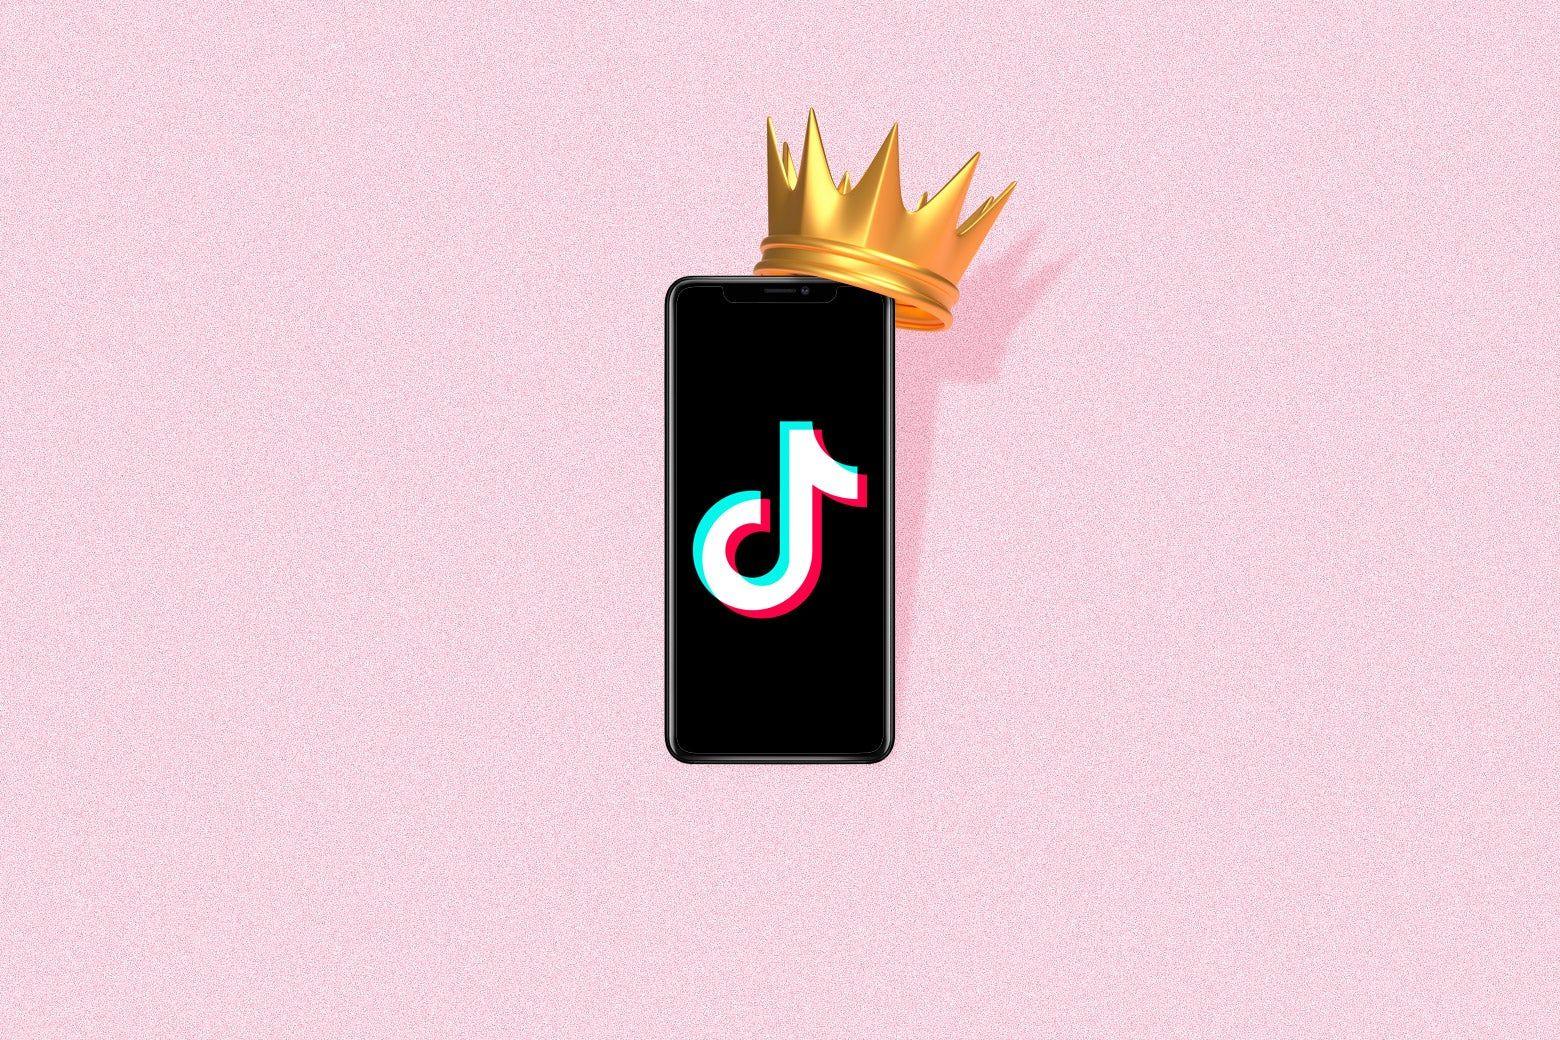 TikTok Logo - What Is Narcissism? TikTok Presents An All Too Simple Picture